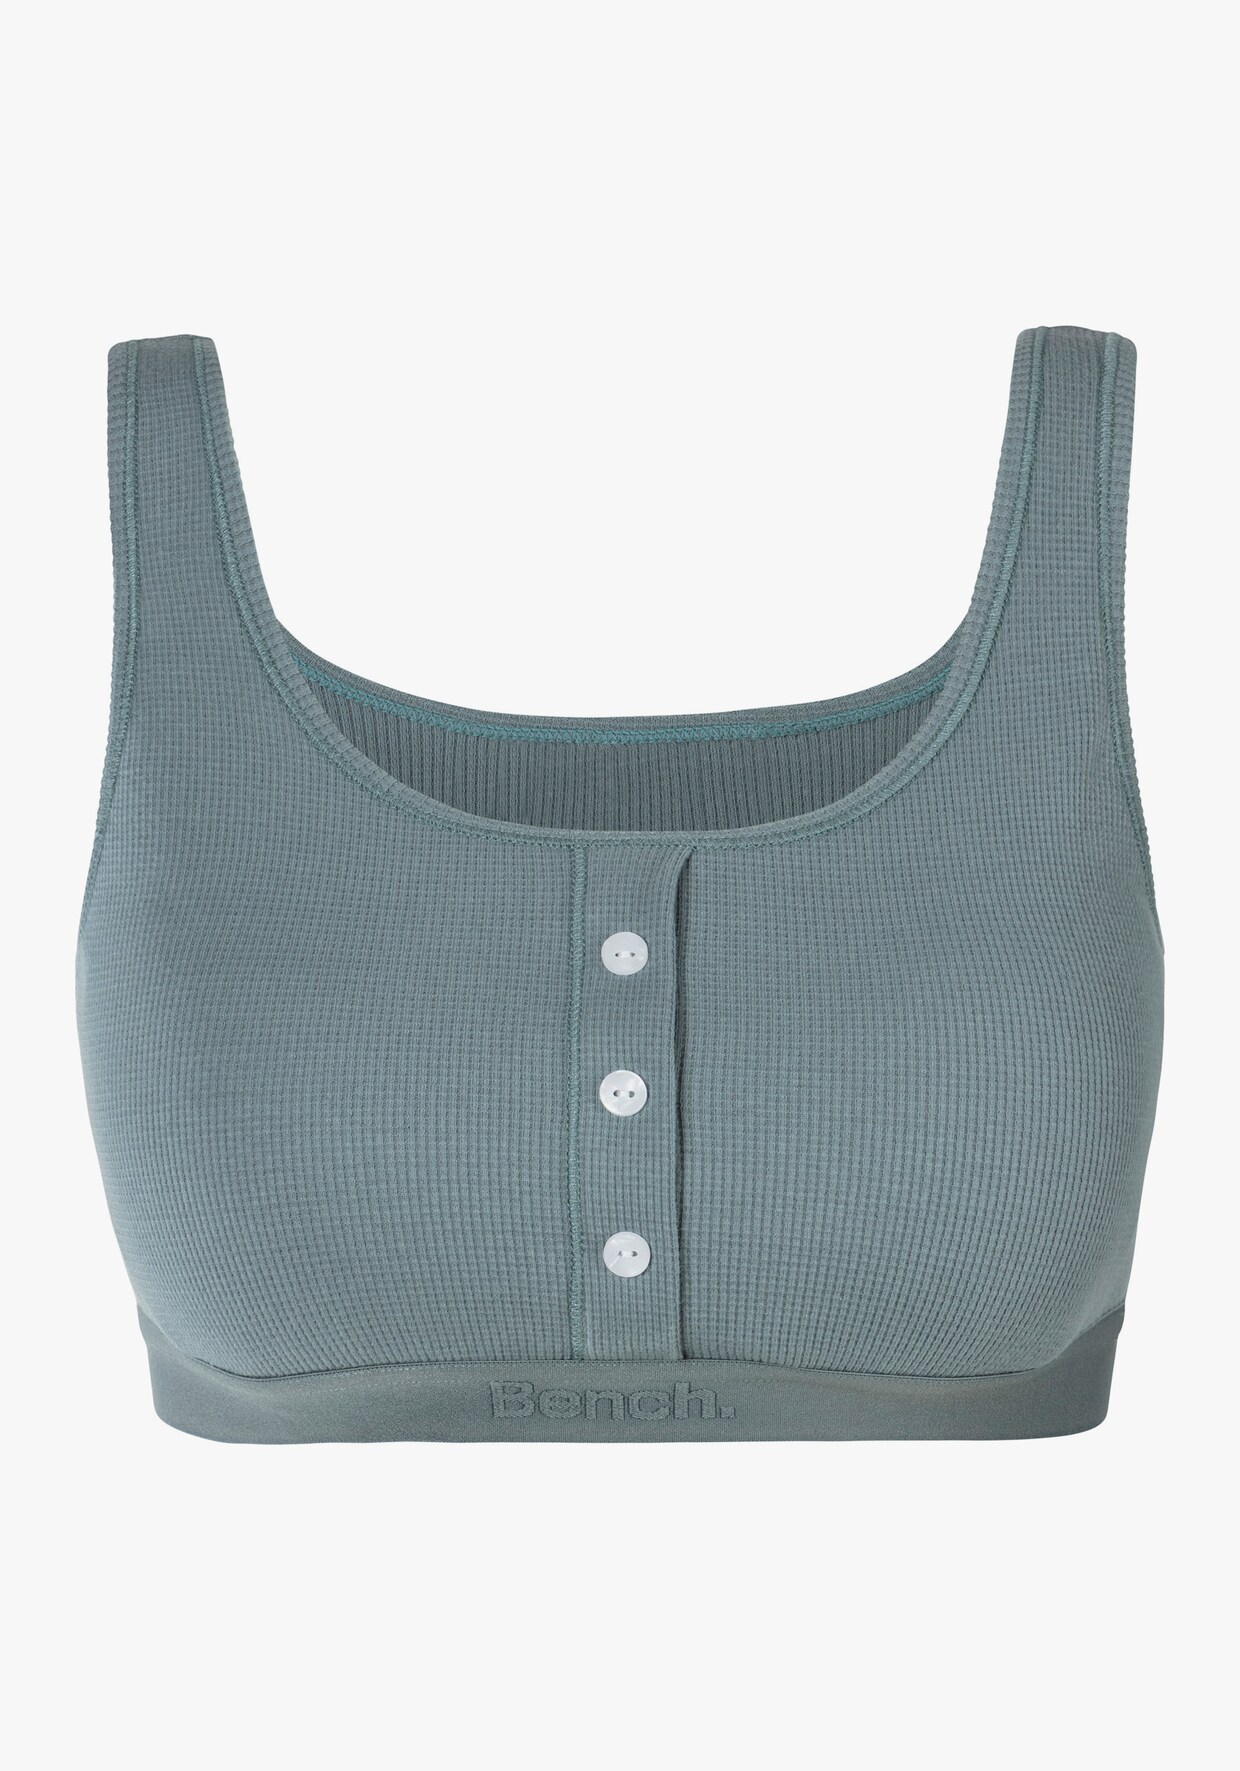 Bench. Bustier - mint, orchidee